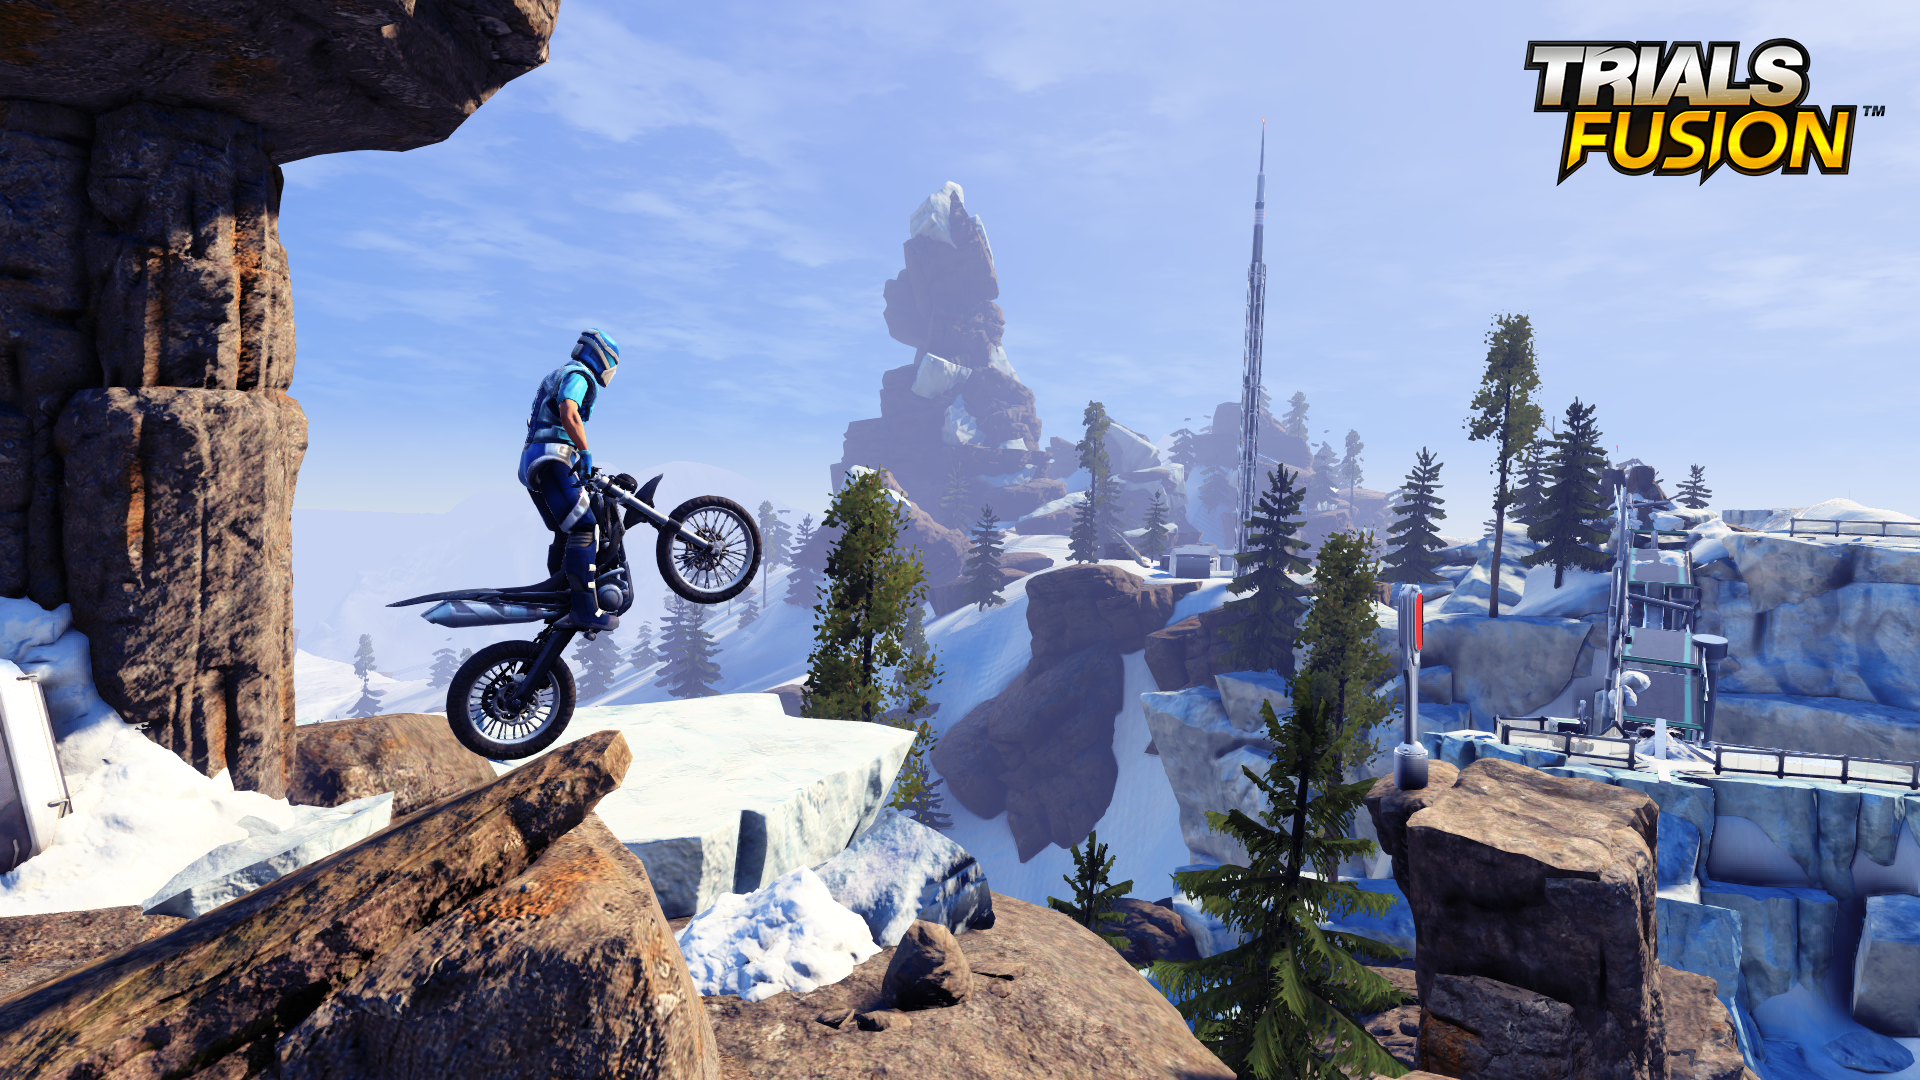 Six things you need to know about Trials Fusion